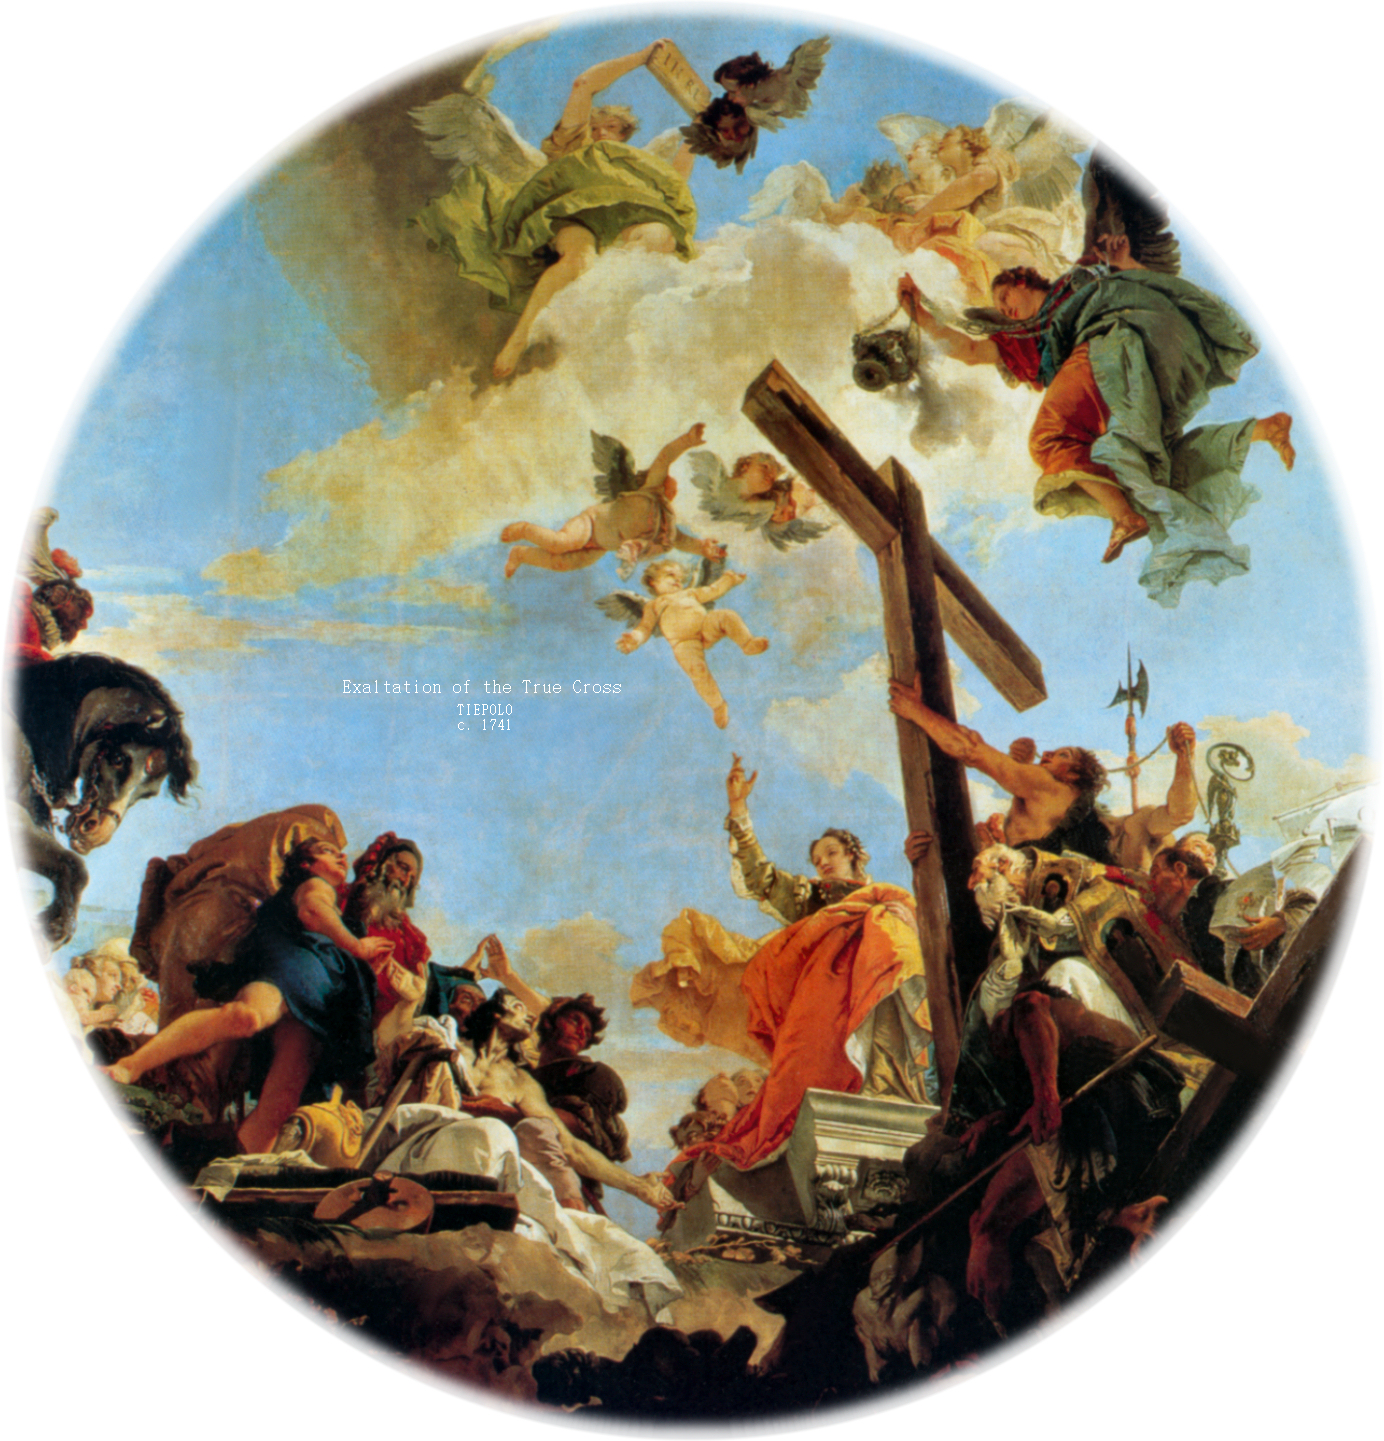 Excaltation of the Holy Cross